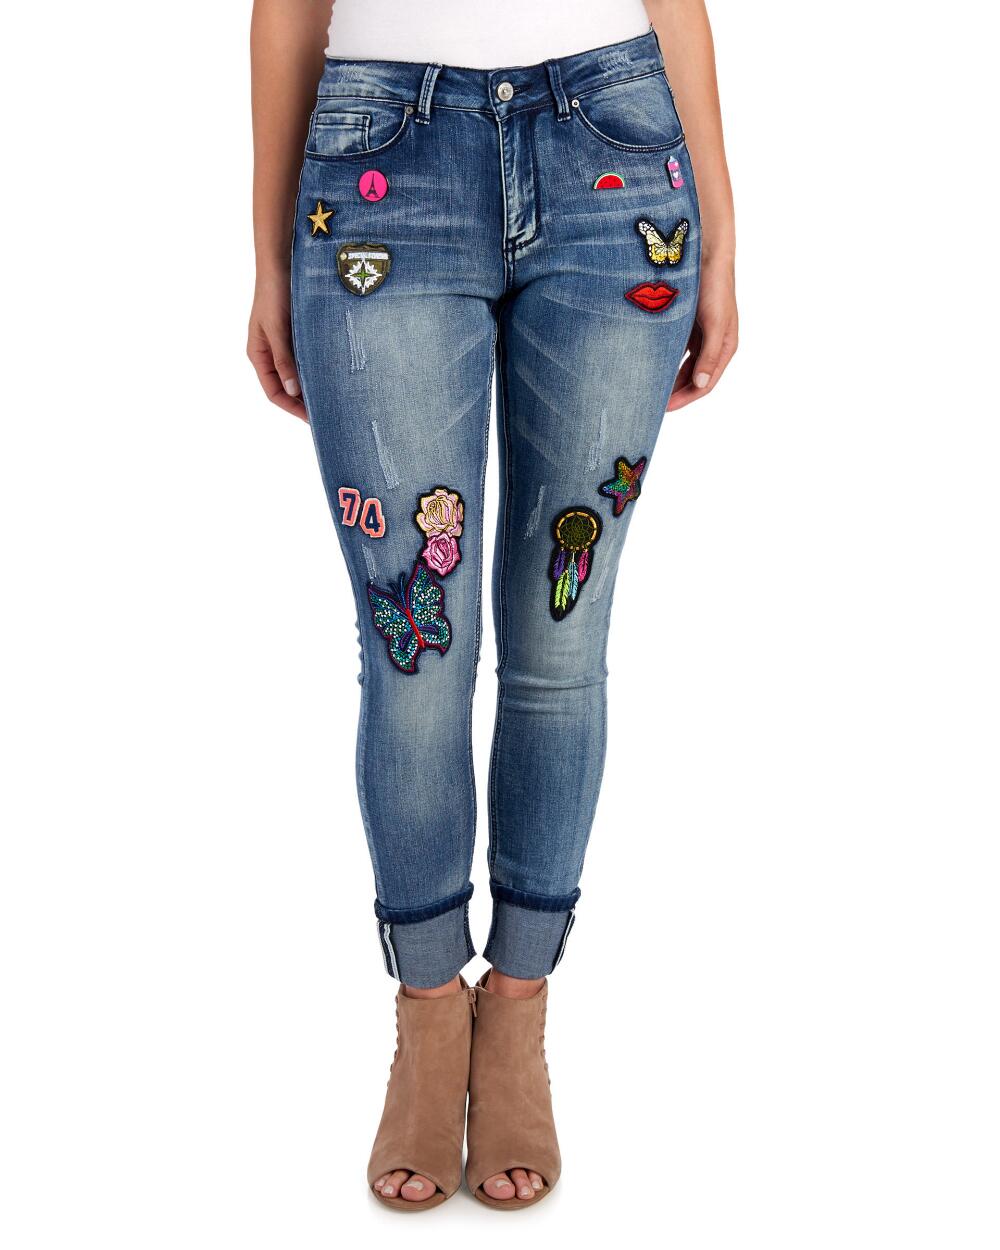 jeans with patches - Fashion Trends and Friends